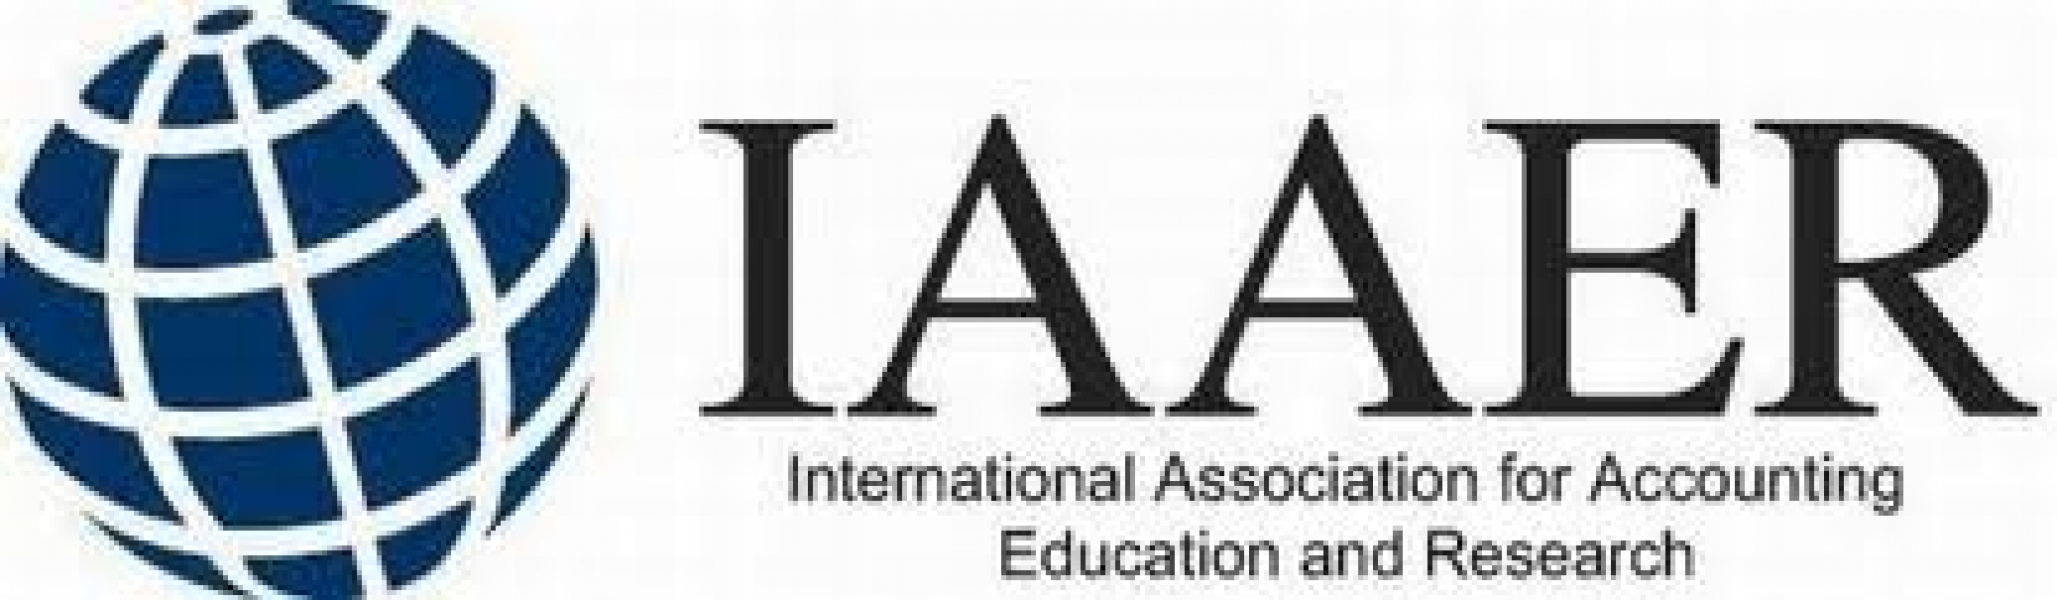 Accounting &Auditing Department is the Member of IAAER